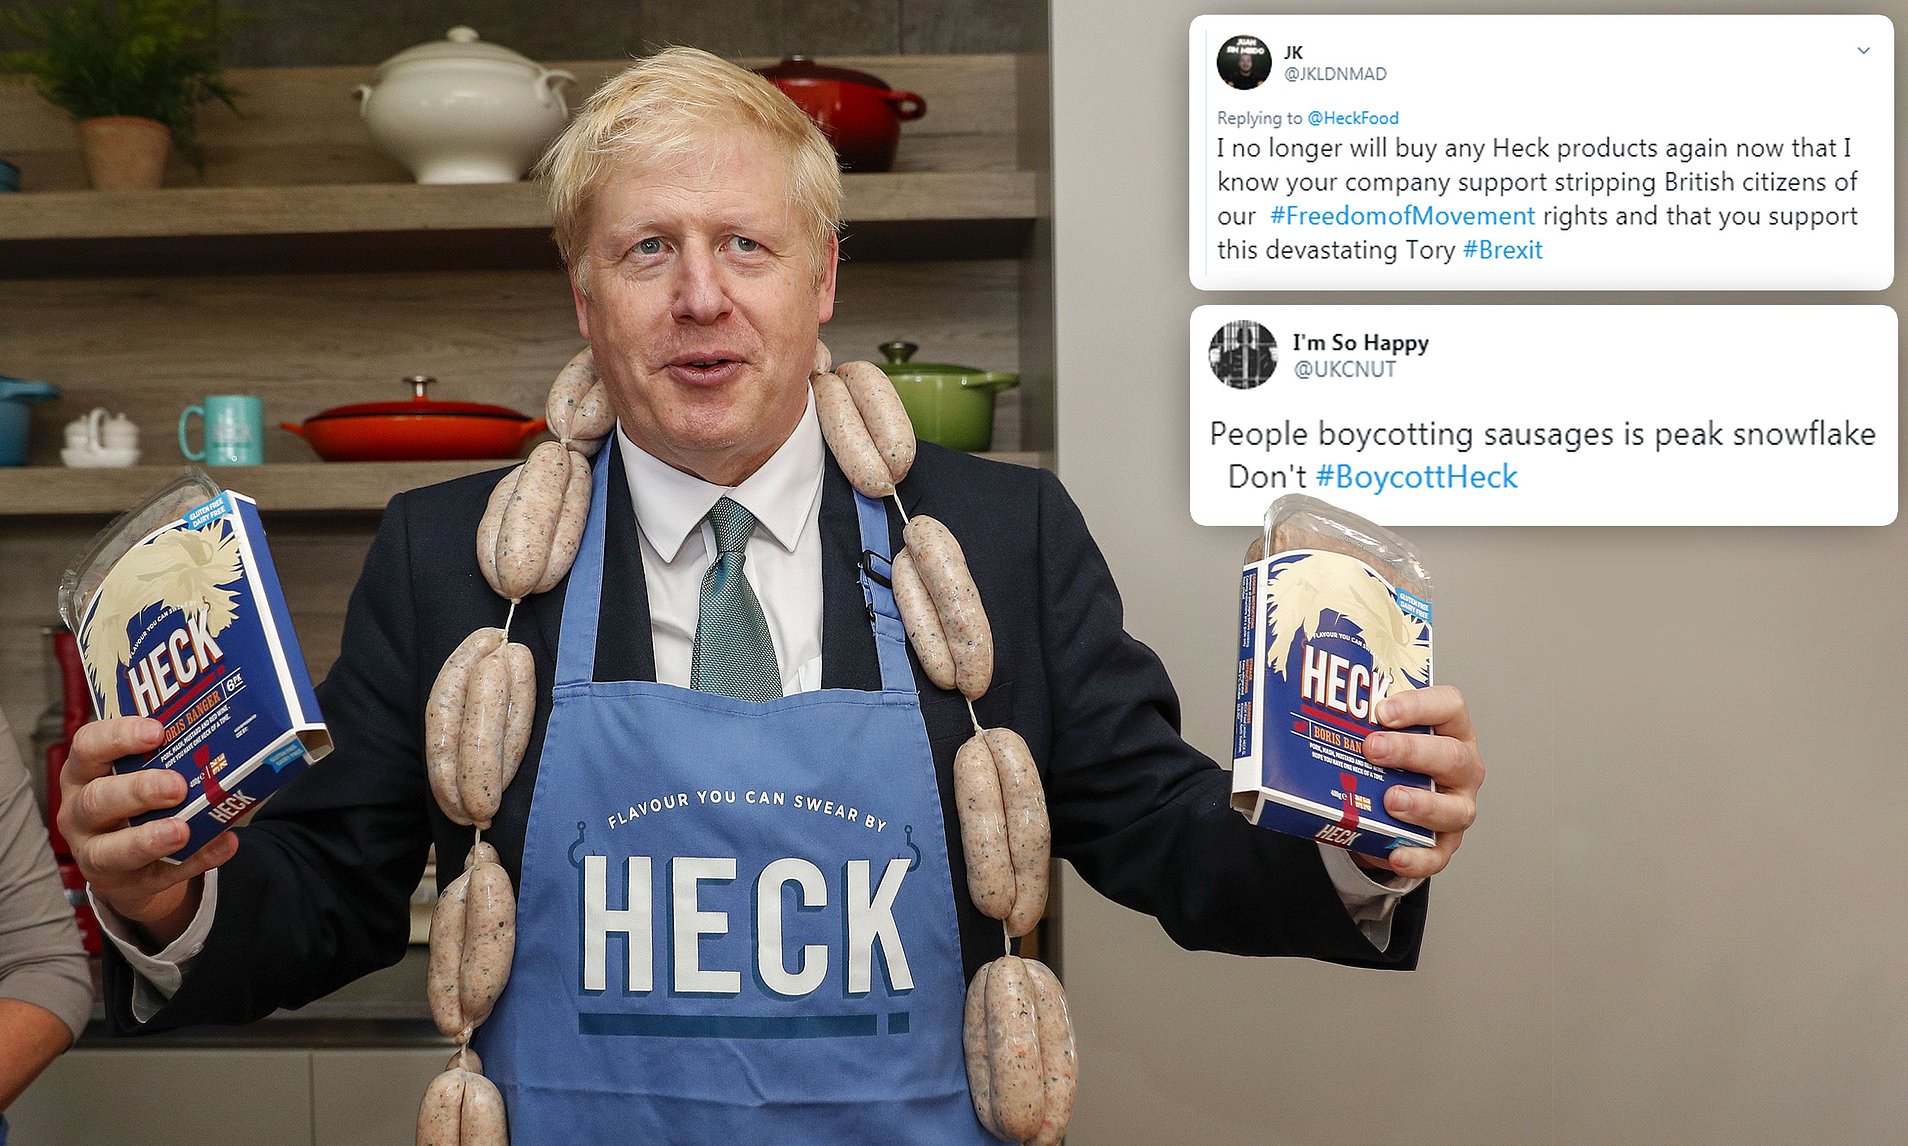 Heck Sausages Employing Prisoners after Witnessing staff numbers drop due to Brexit!